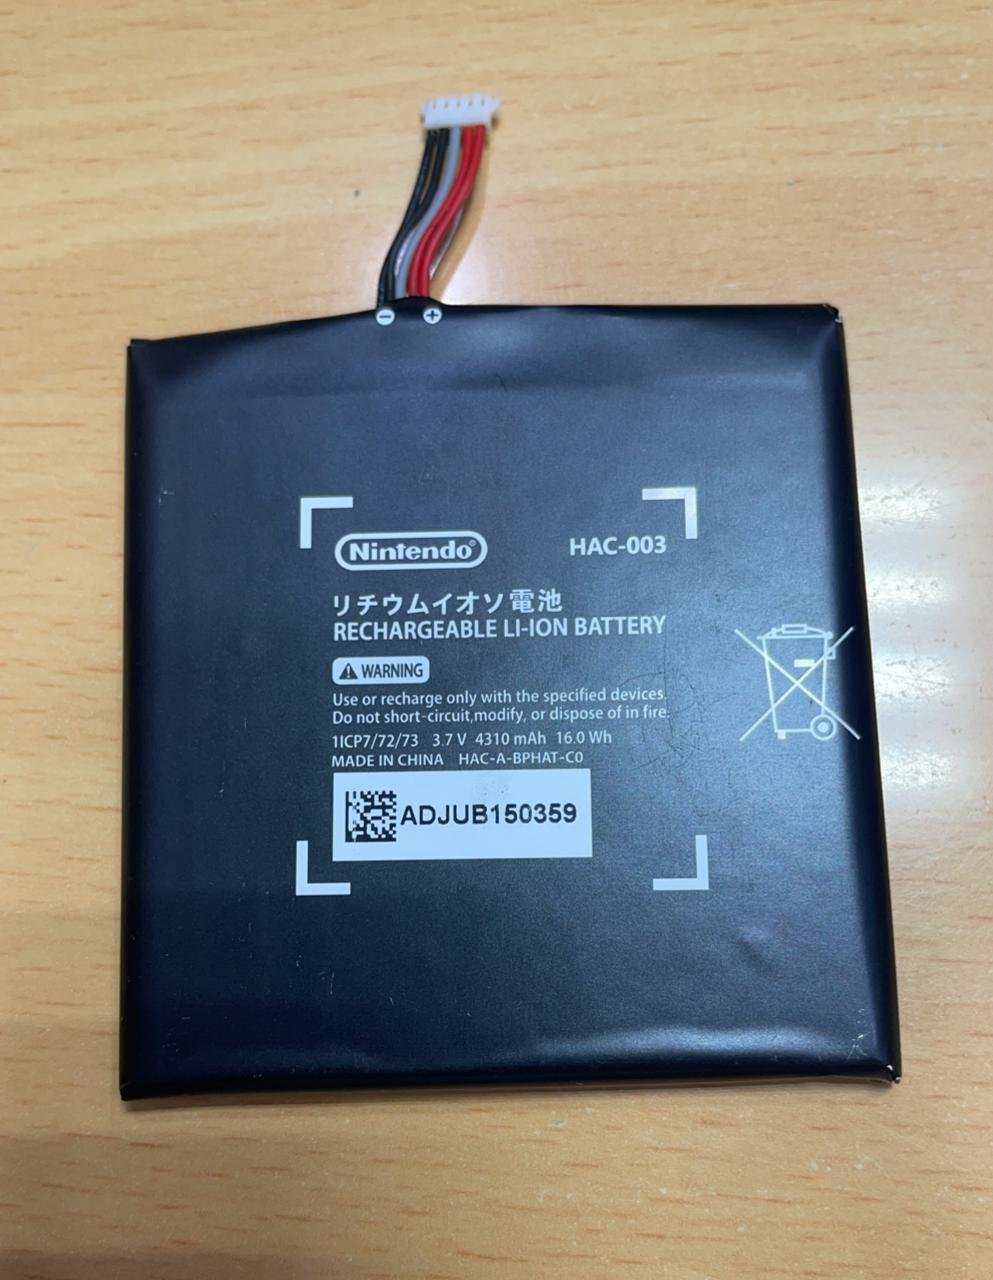 Nintendo Switch Battery Replacement